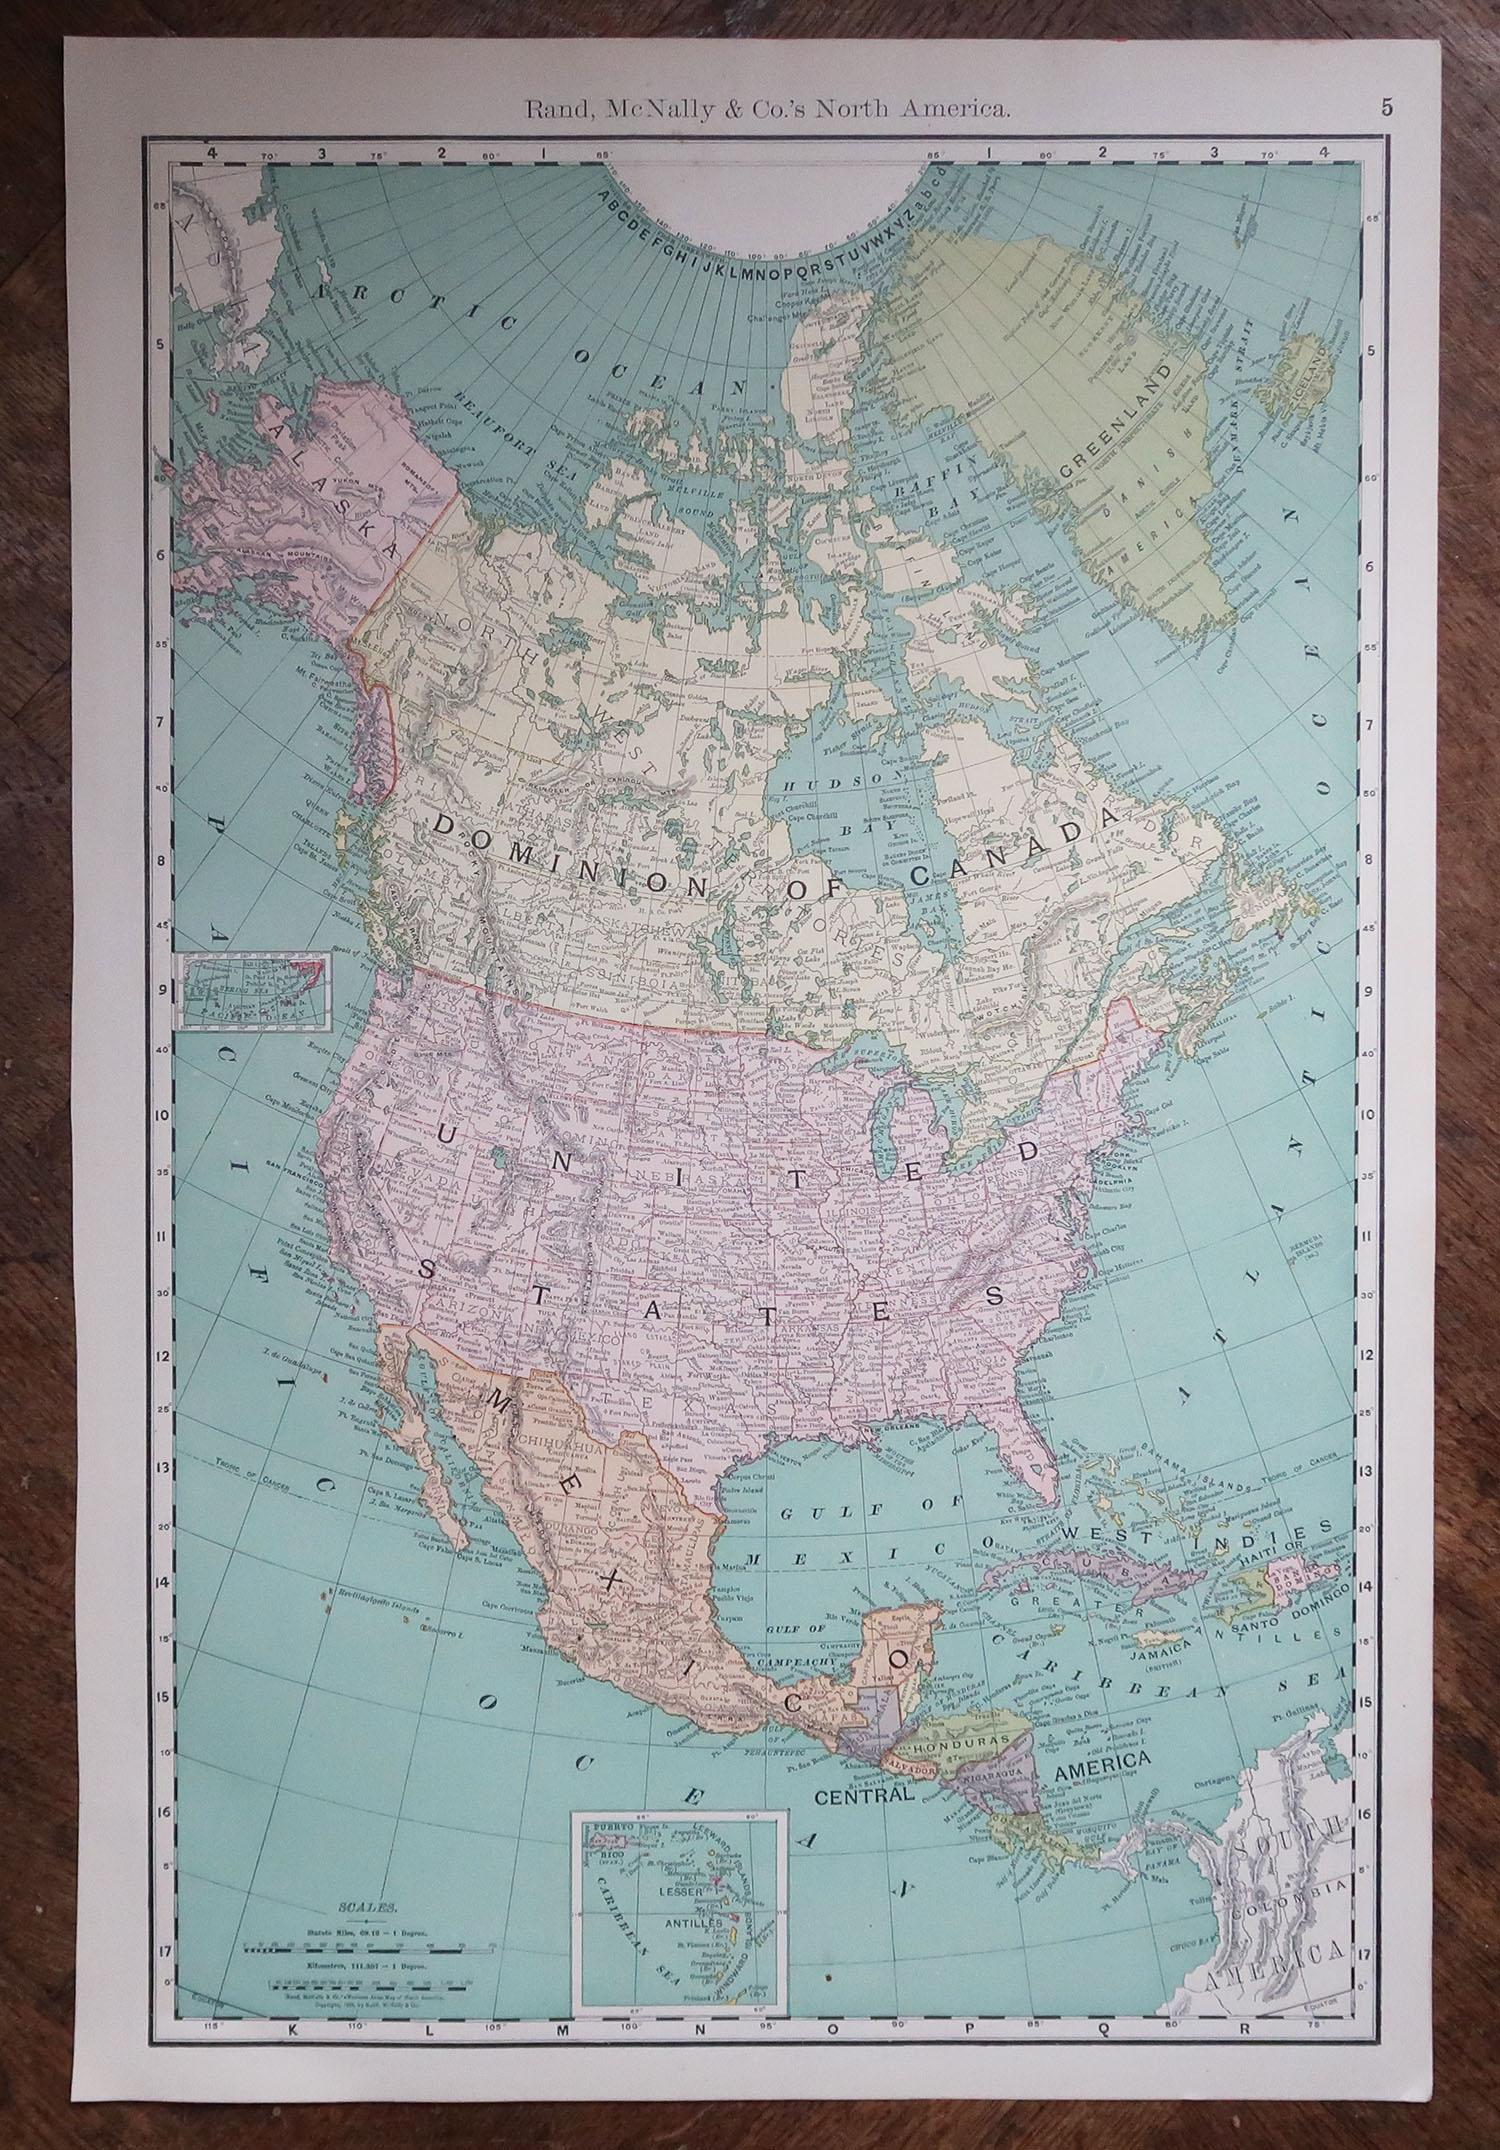 Other Large Original Antique Map of North America, 1891